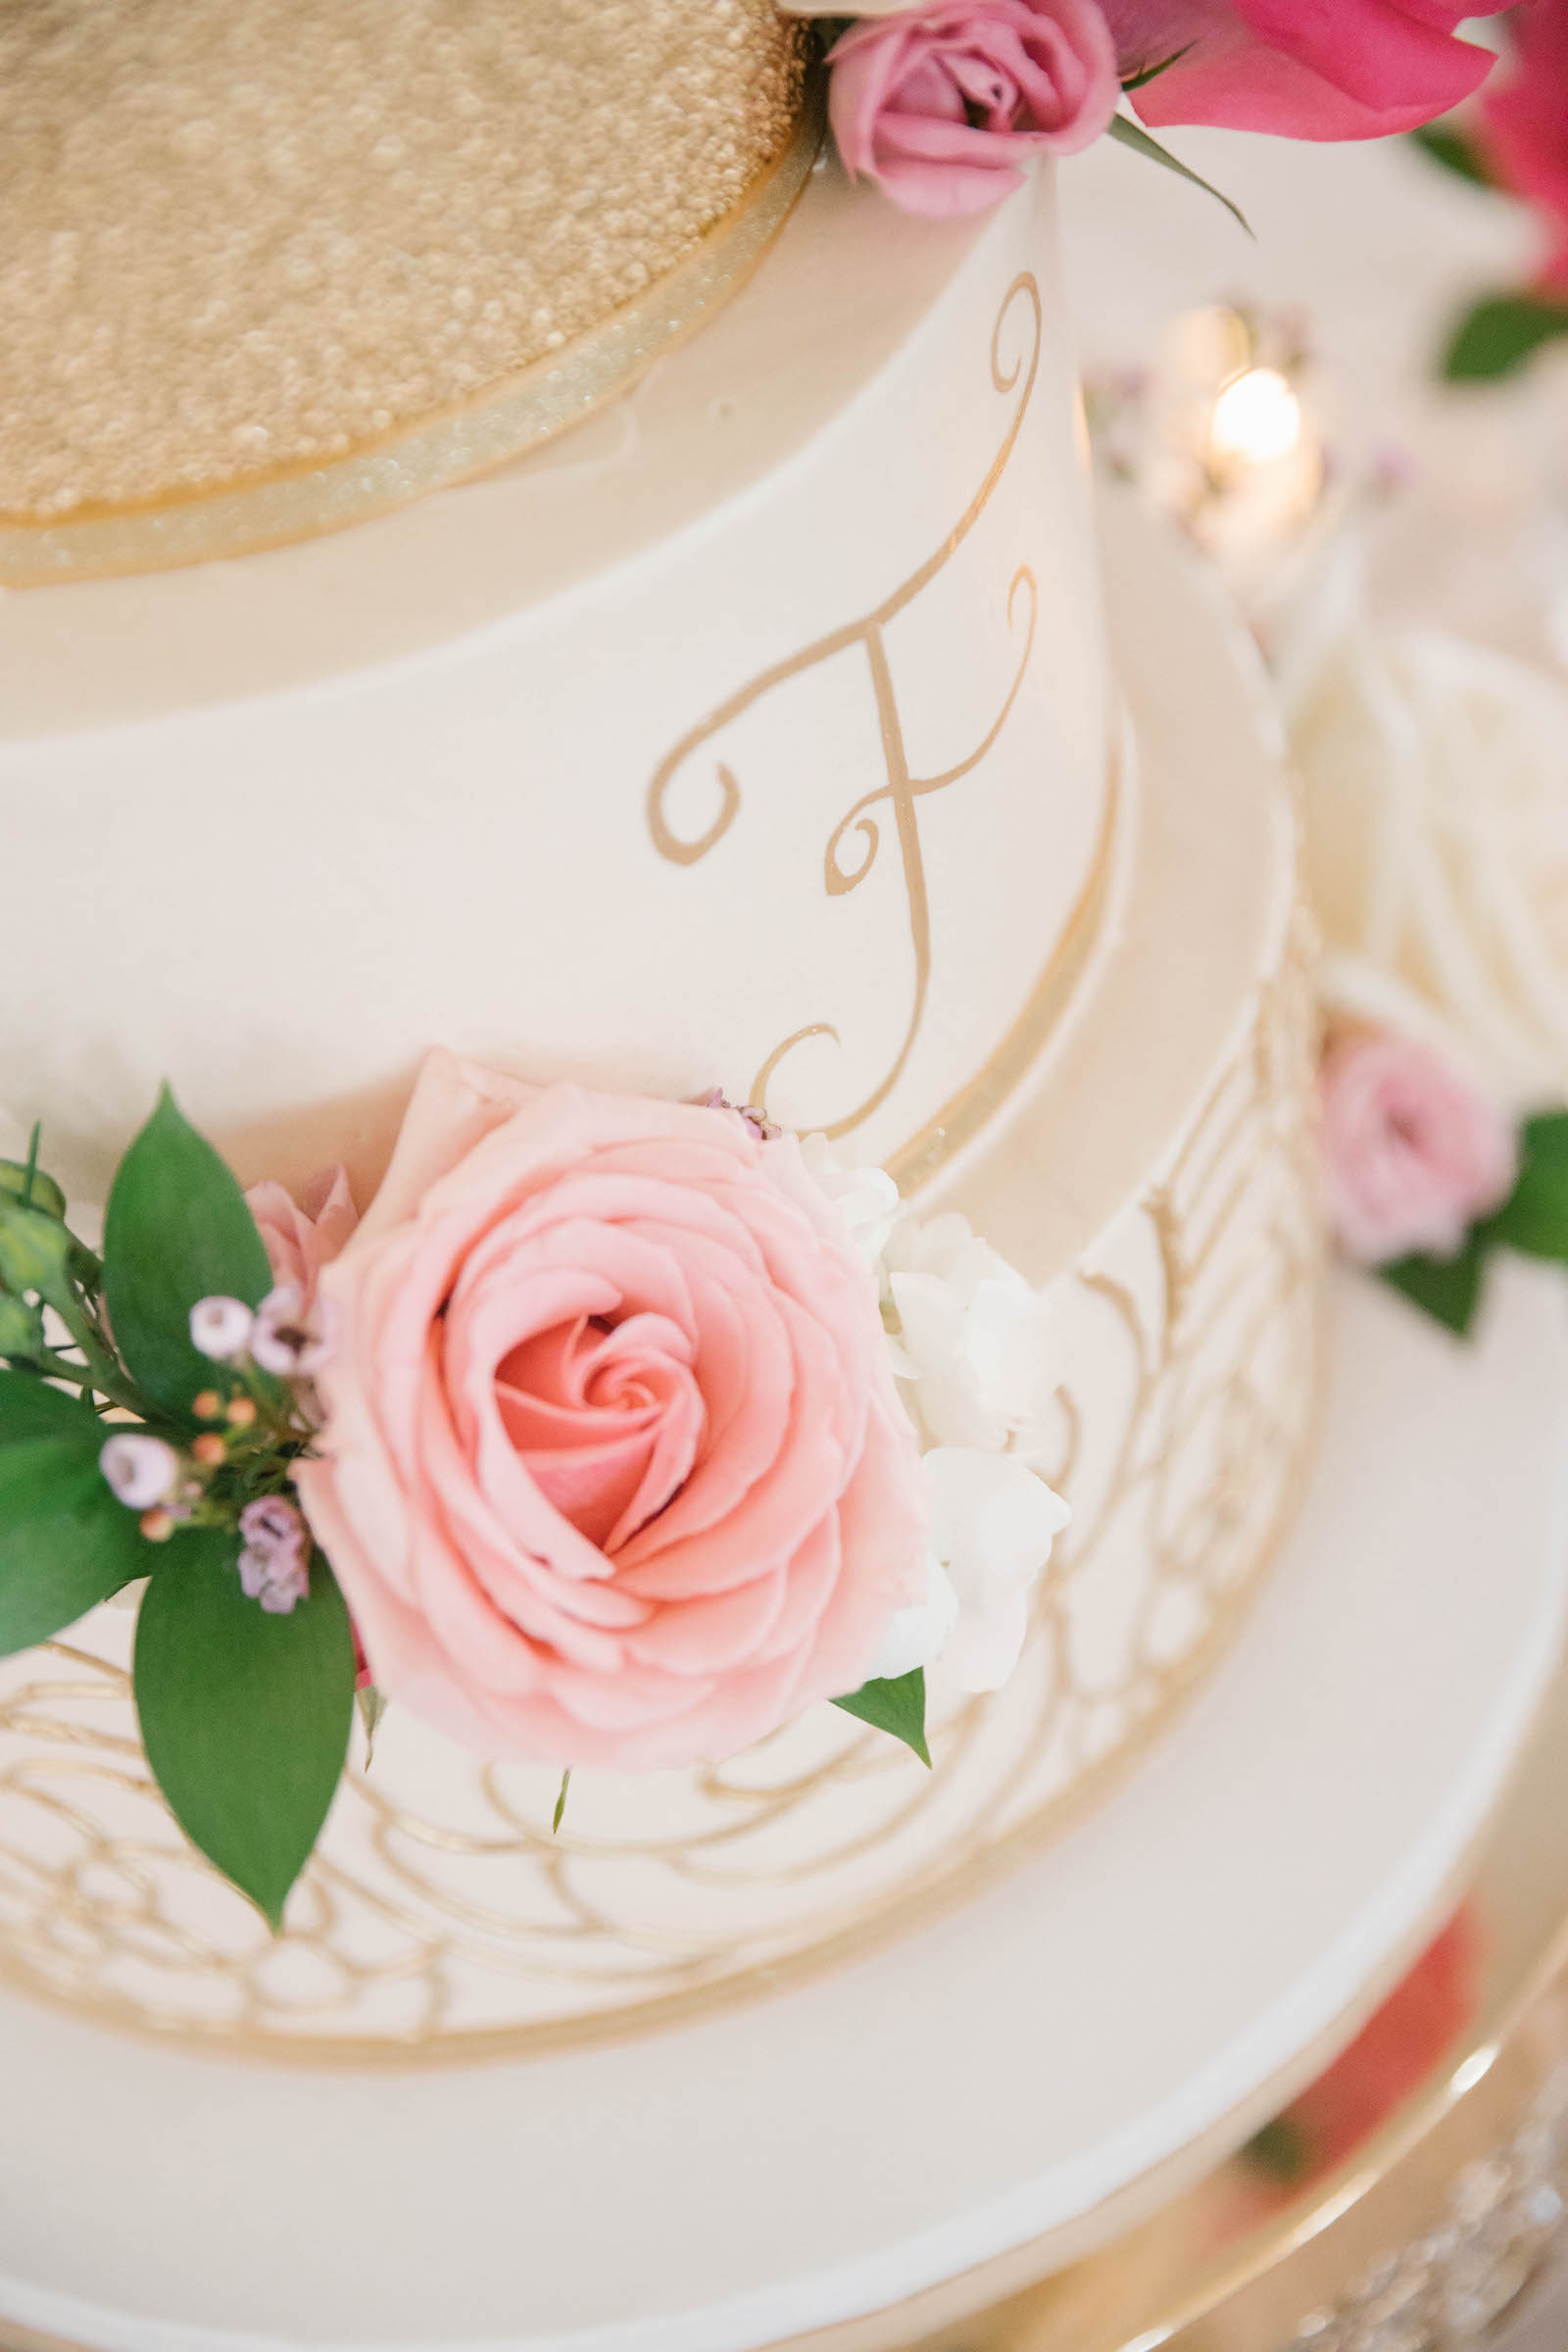 Three Tier White and Gold Wedding Cake with Script Monogram Lettering with Vibrant Pink Roses on Crystal and Gold Cake Stand | Tampa Bay Wedding Planner Parties A'la Carte | Wedding Cake The Artistic Whisk